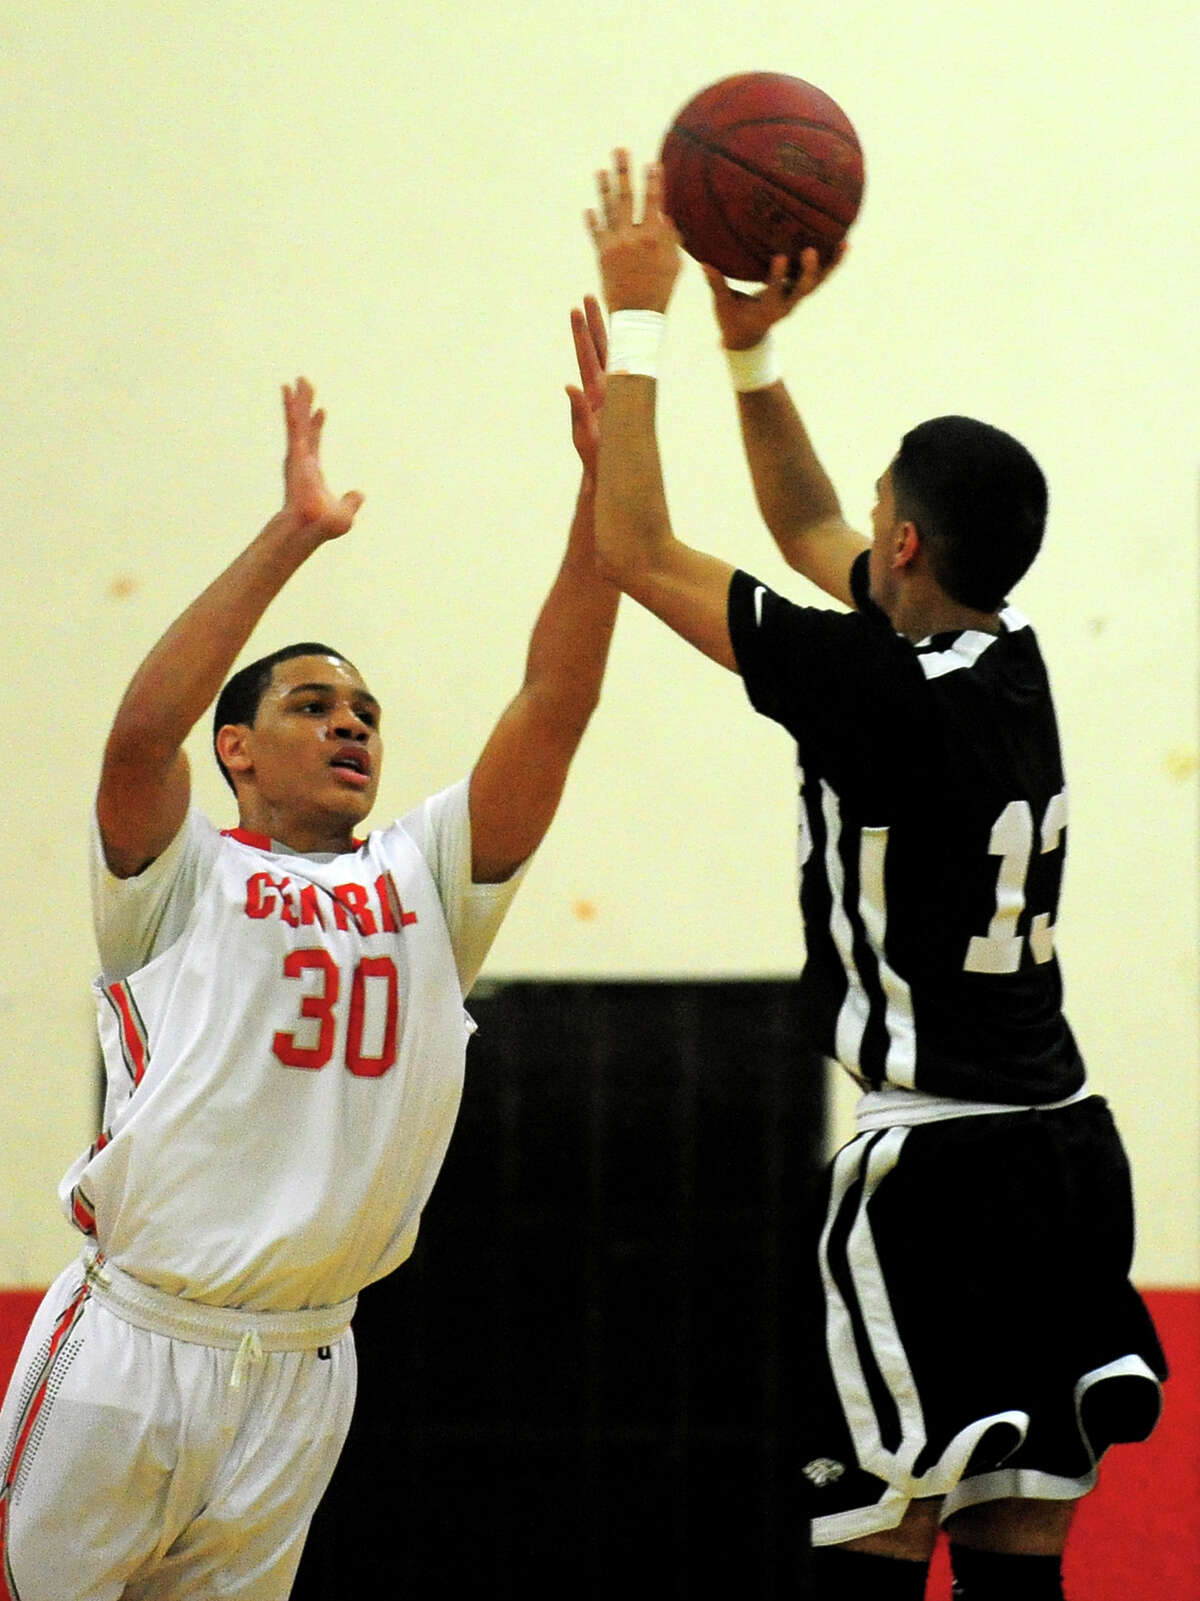 Central's Marcus Blackwell looks to block a shot by Trumbull's Rashard Rodriquez, during boys basketball action against Trumbull in Bridgeport, Conn. on Friday February 7, 2014.